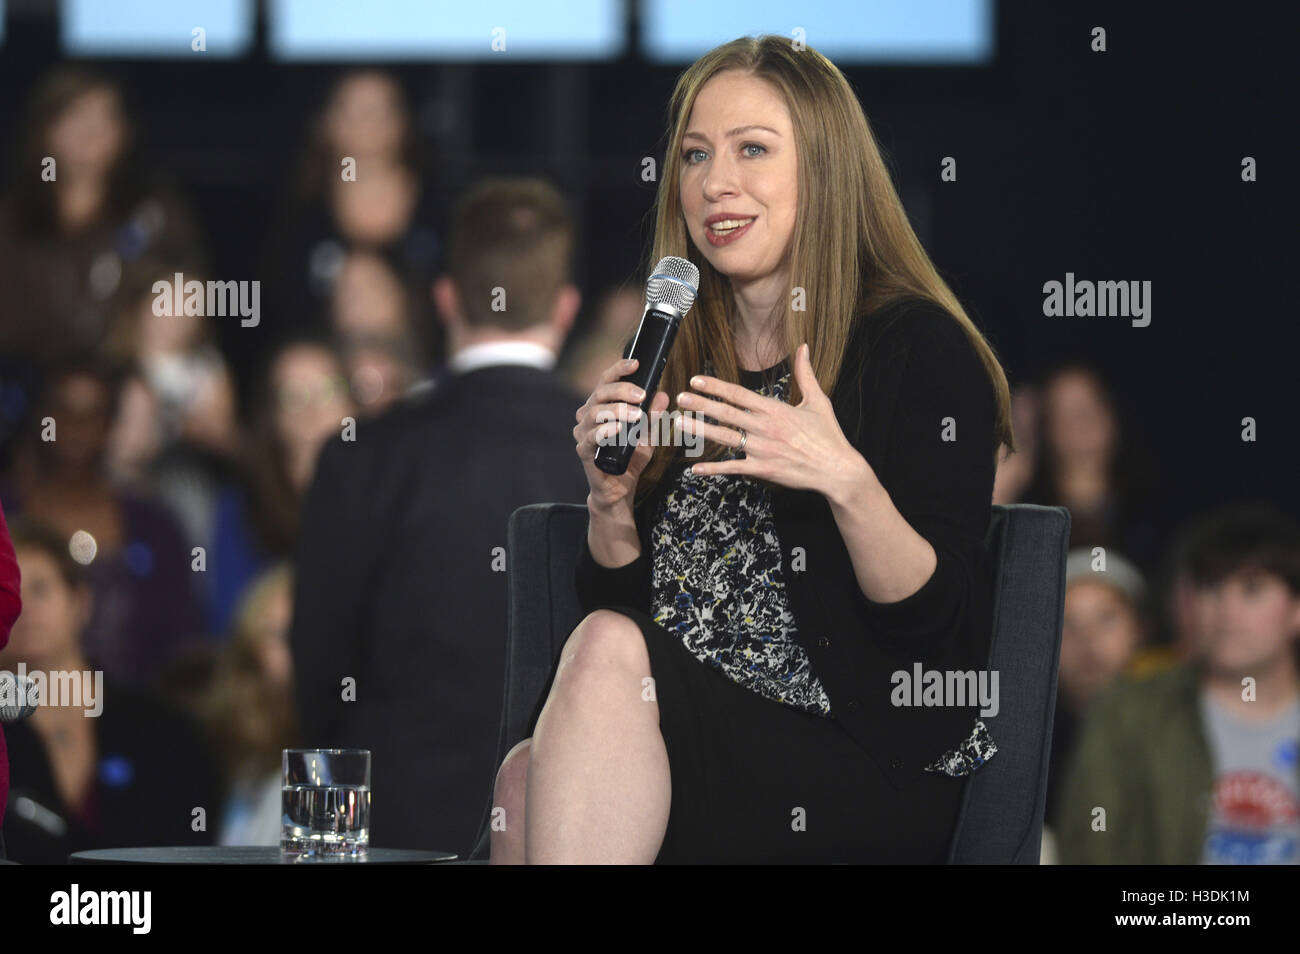 Haverford, USA. 4th Oct, 2016. Chelsea Clinton holds a conversation with families about Clinton's agenda to support children and families and create an economy that works for everyone at Haverford Community Recreation & Environmental Center on October 4, 2016 in Haverford, USA. | Verwendung weltweit/picture alliance © dpa/Alamy Live News Stock Photo